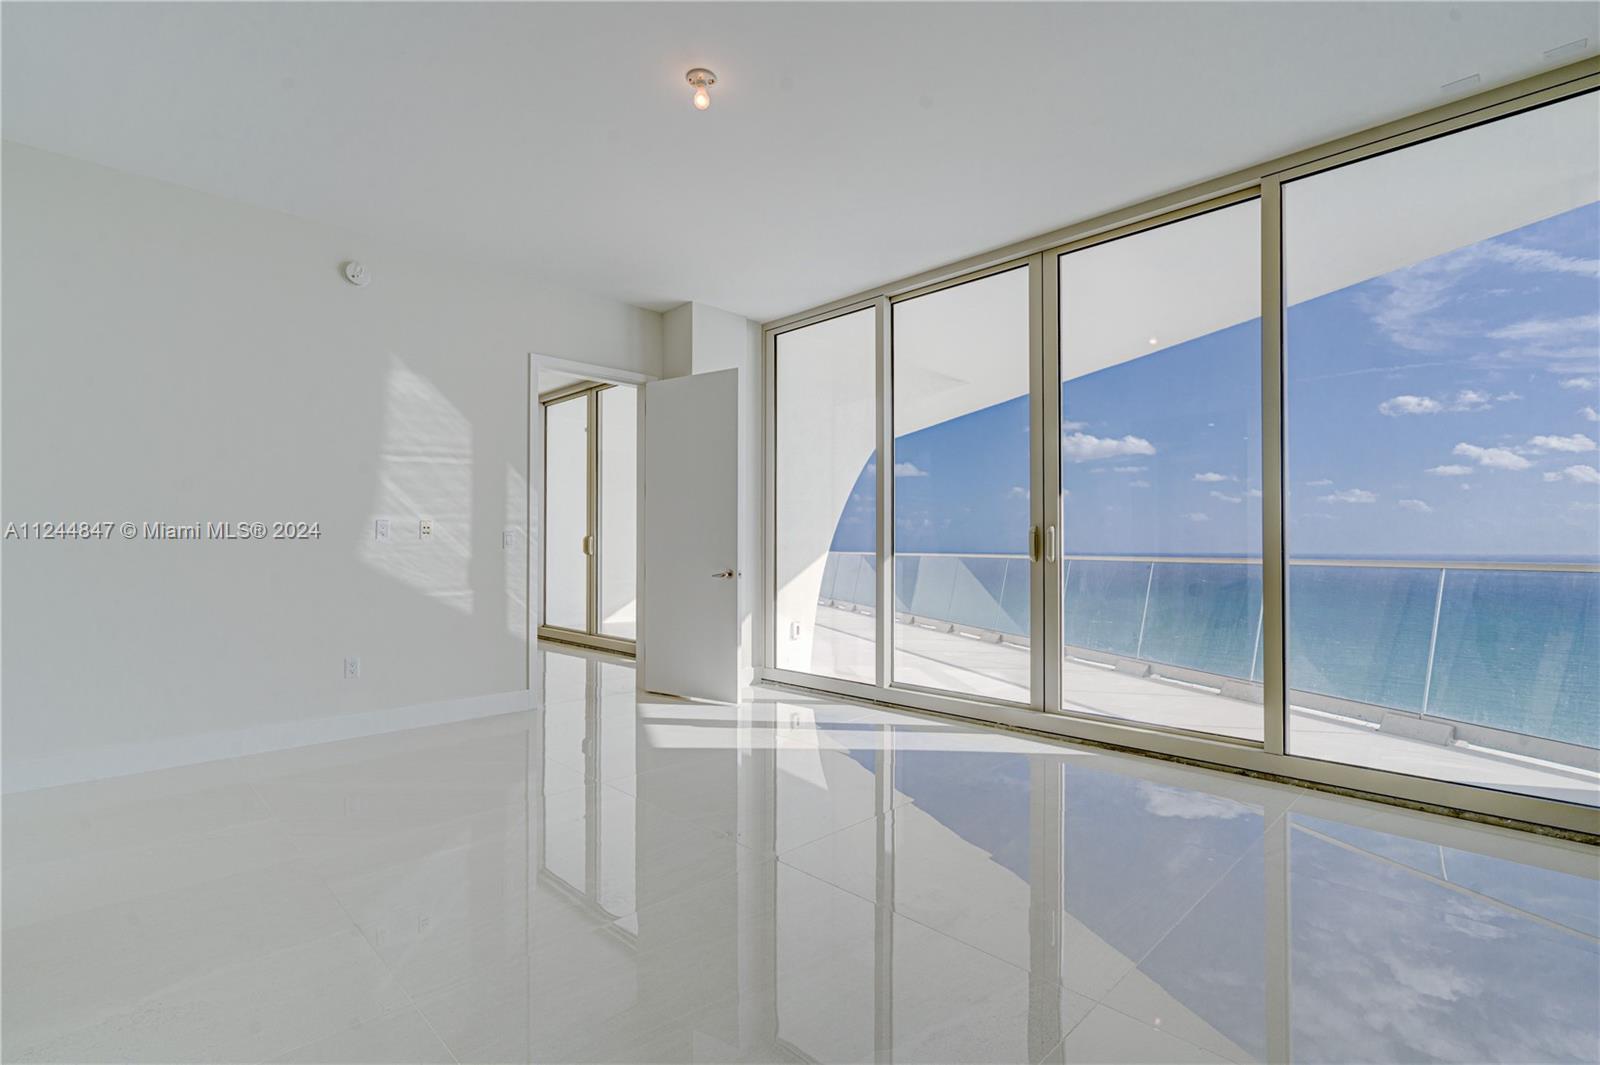 MASTER SUITE WITH DIRECT OCEAN VIEWS